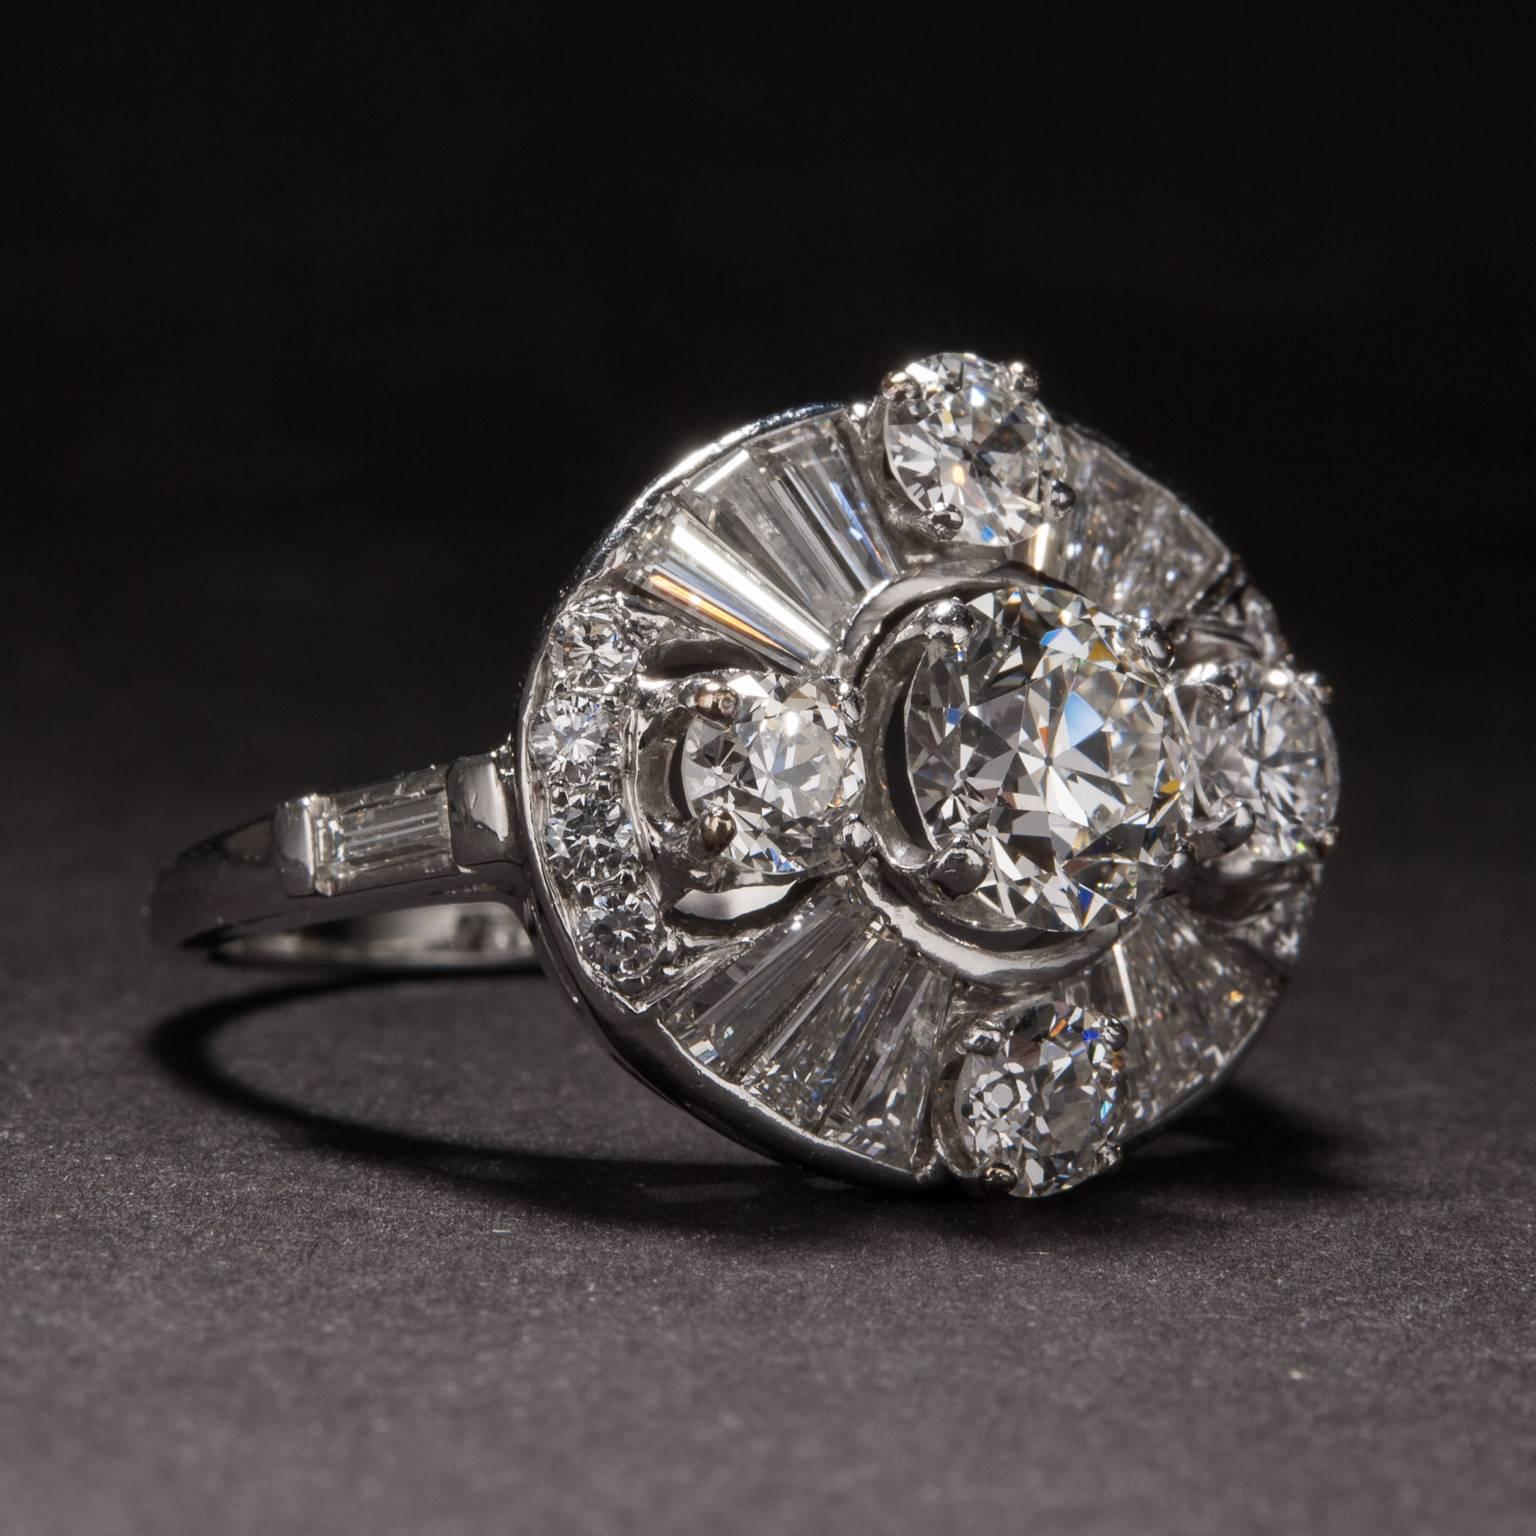 This stunning retro ring features a 1.35 carat center diamond, 1.50 total carats of side diamonds, and 1.30 total carats of accent baguette diamonds. This piece was crafted in platinum circa 1940 and is currently sized at 9, although it may be sized